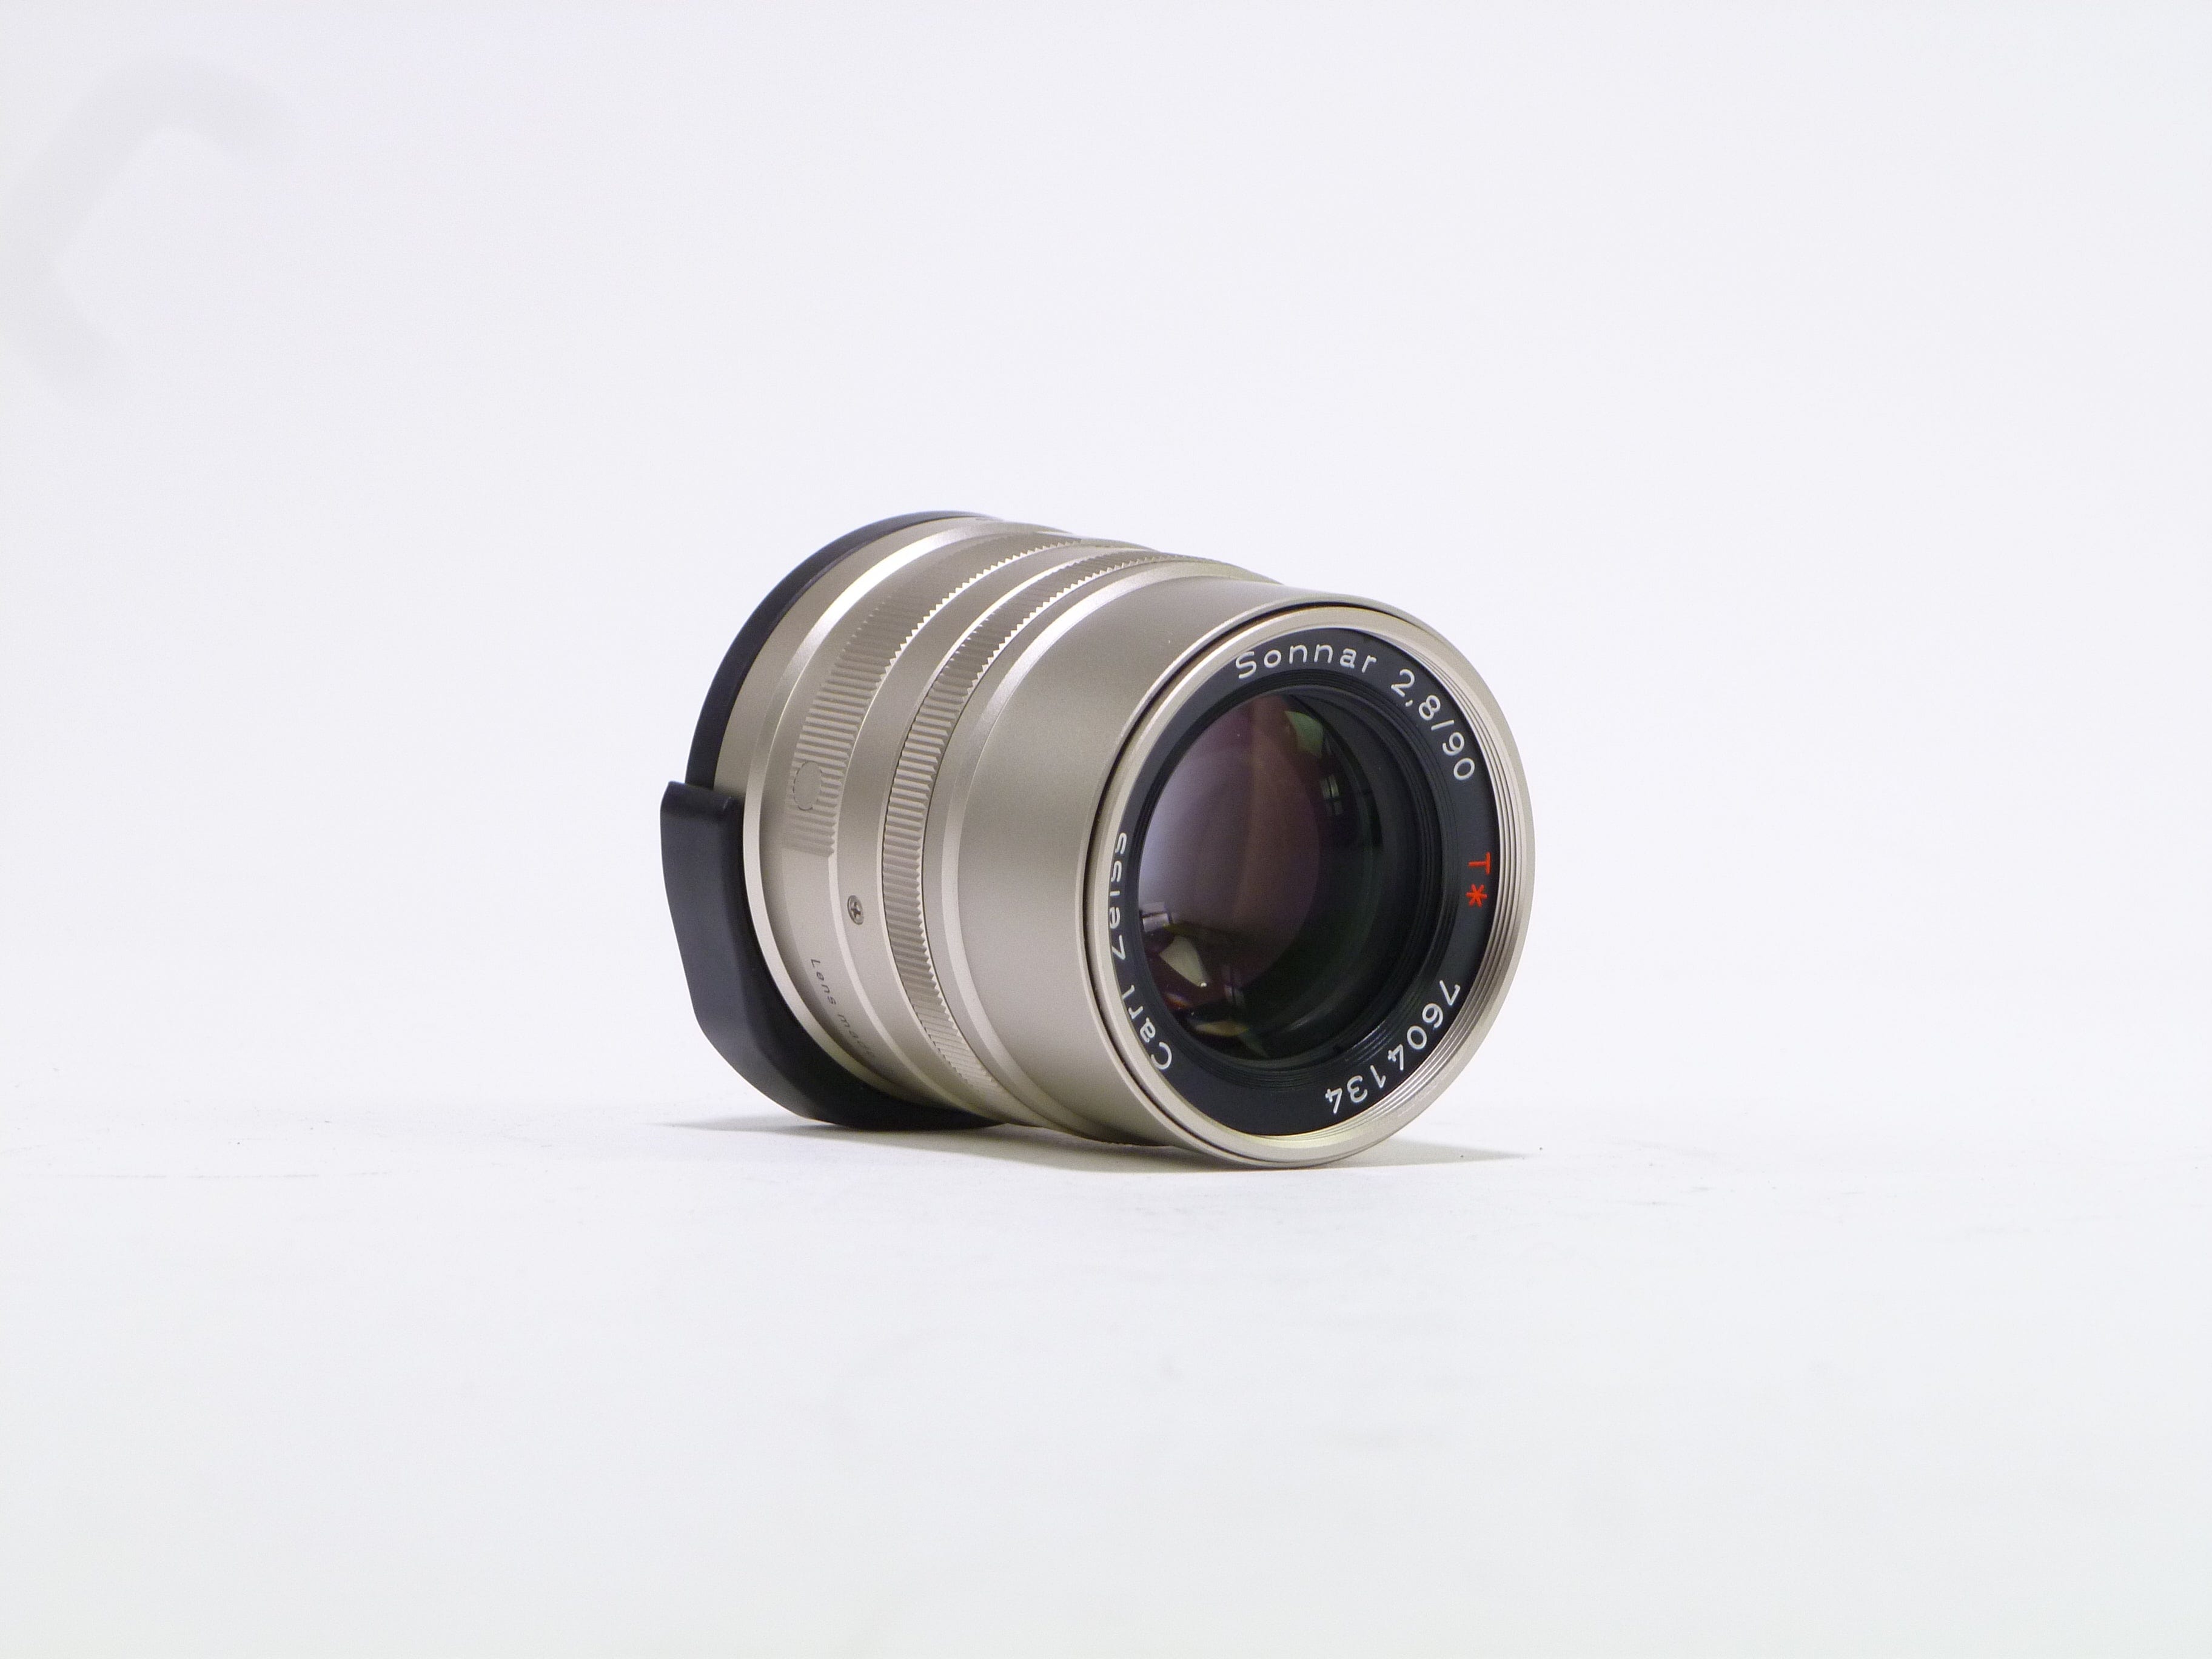 Carl Zeiss Sonnar T* 90mm f/2.8 Contax G Lens – Camera Exchange